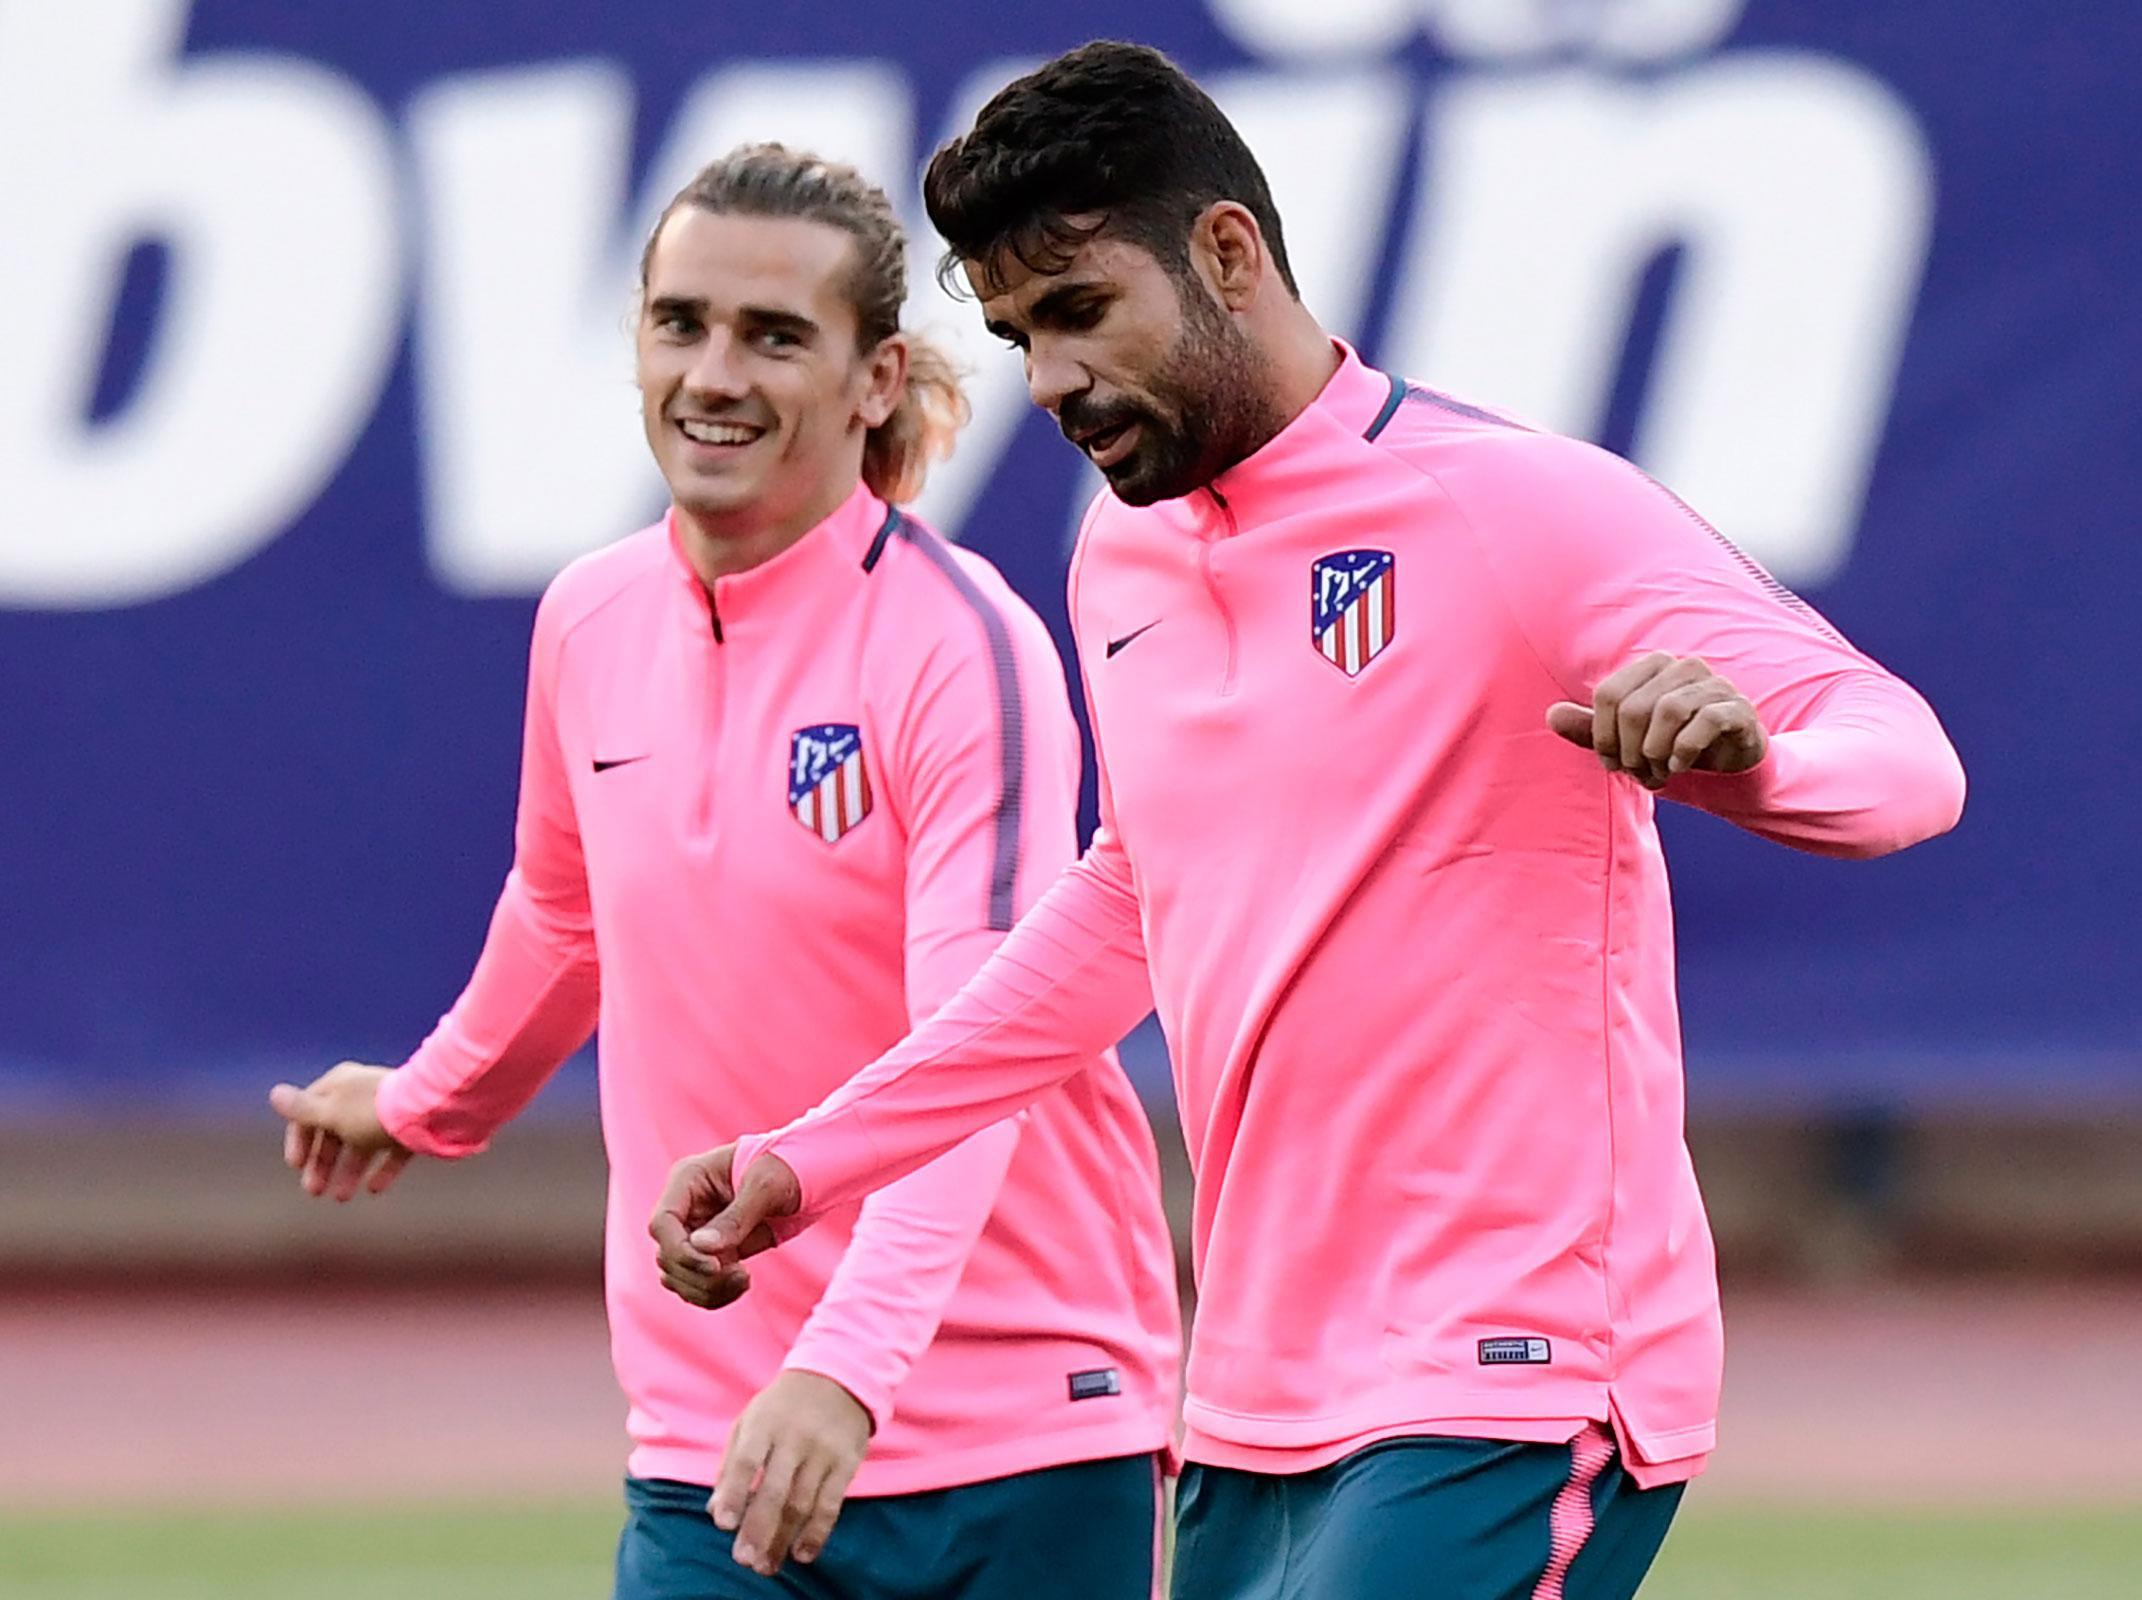 Diego Costa is ineligible to play for Atletico until January